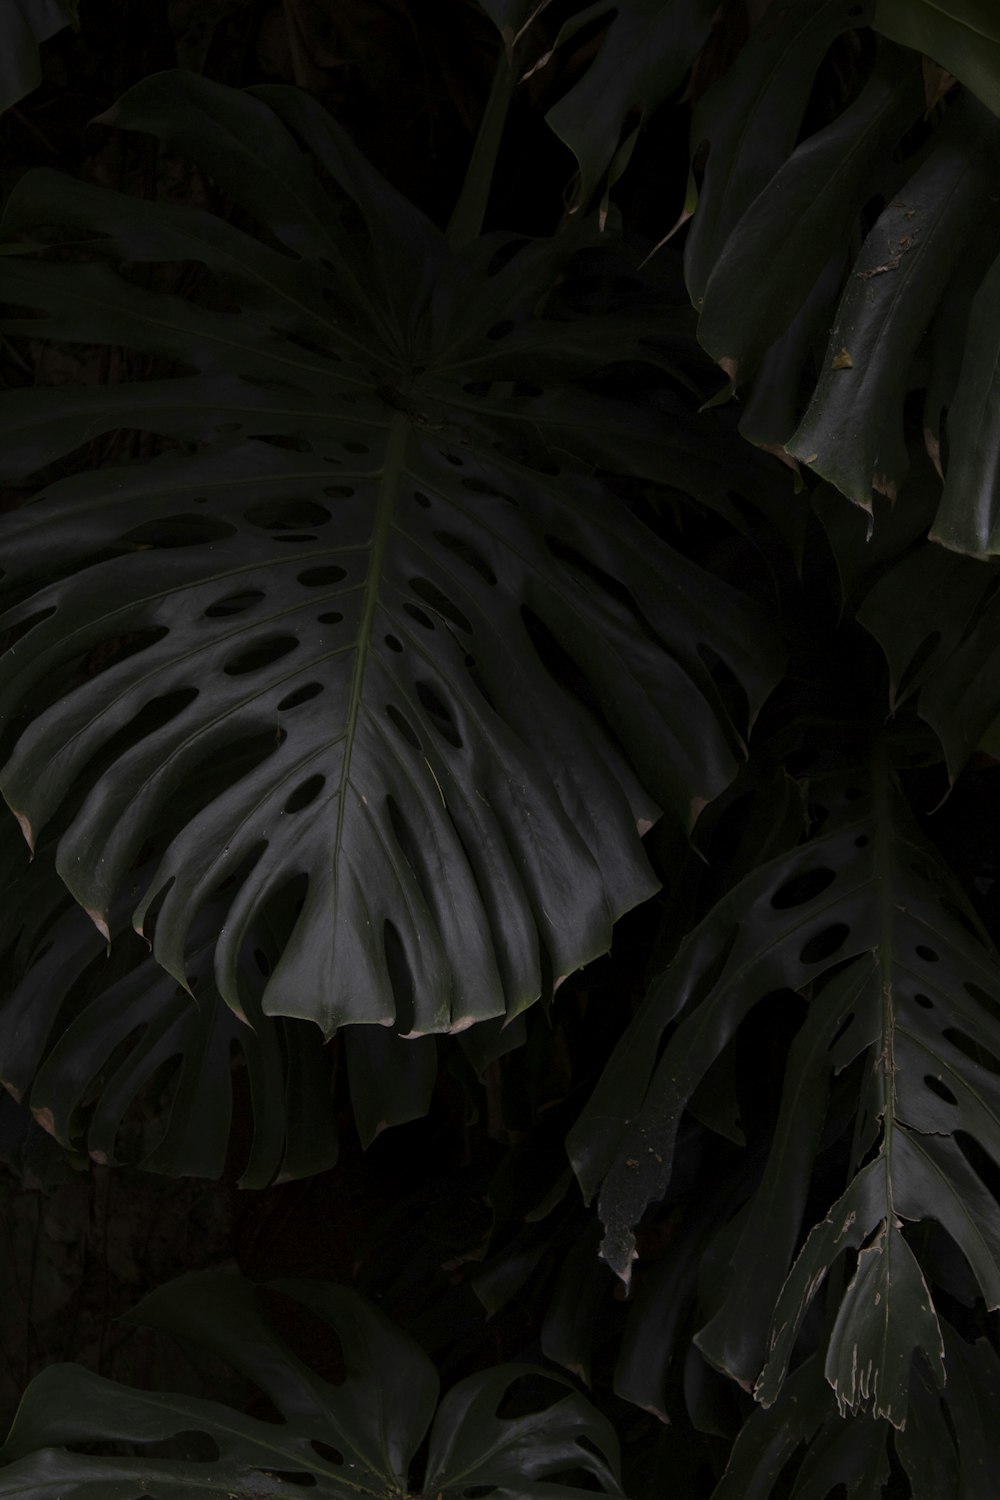 a close up of a plant with large leaves